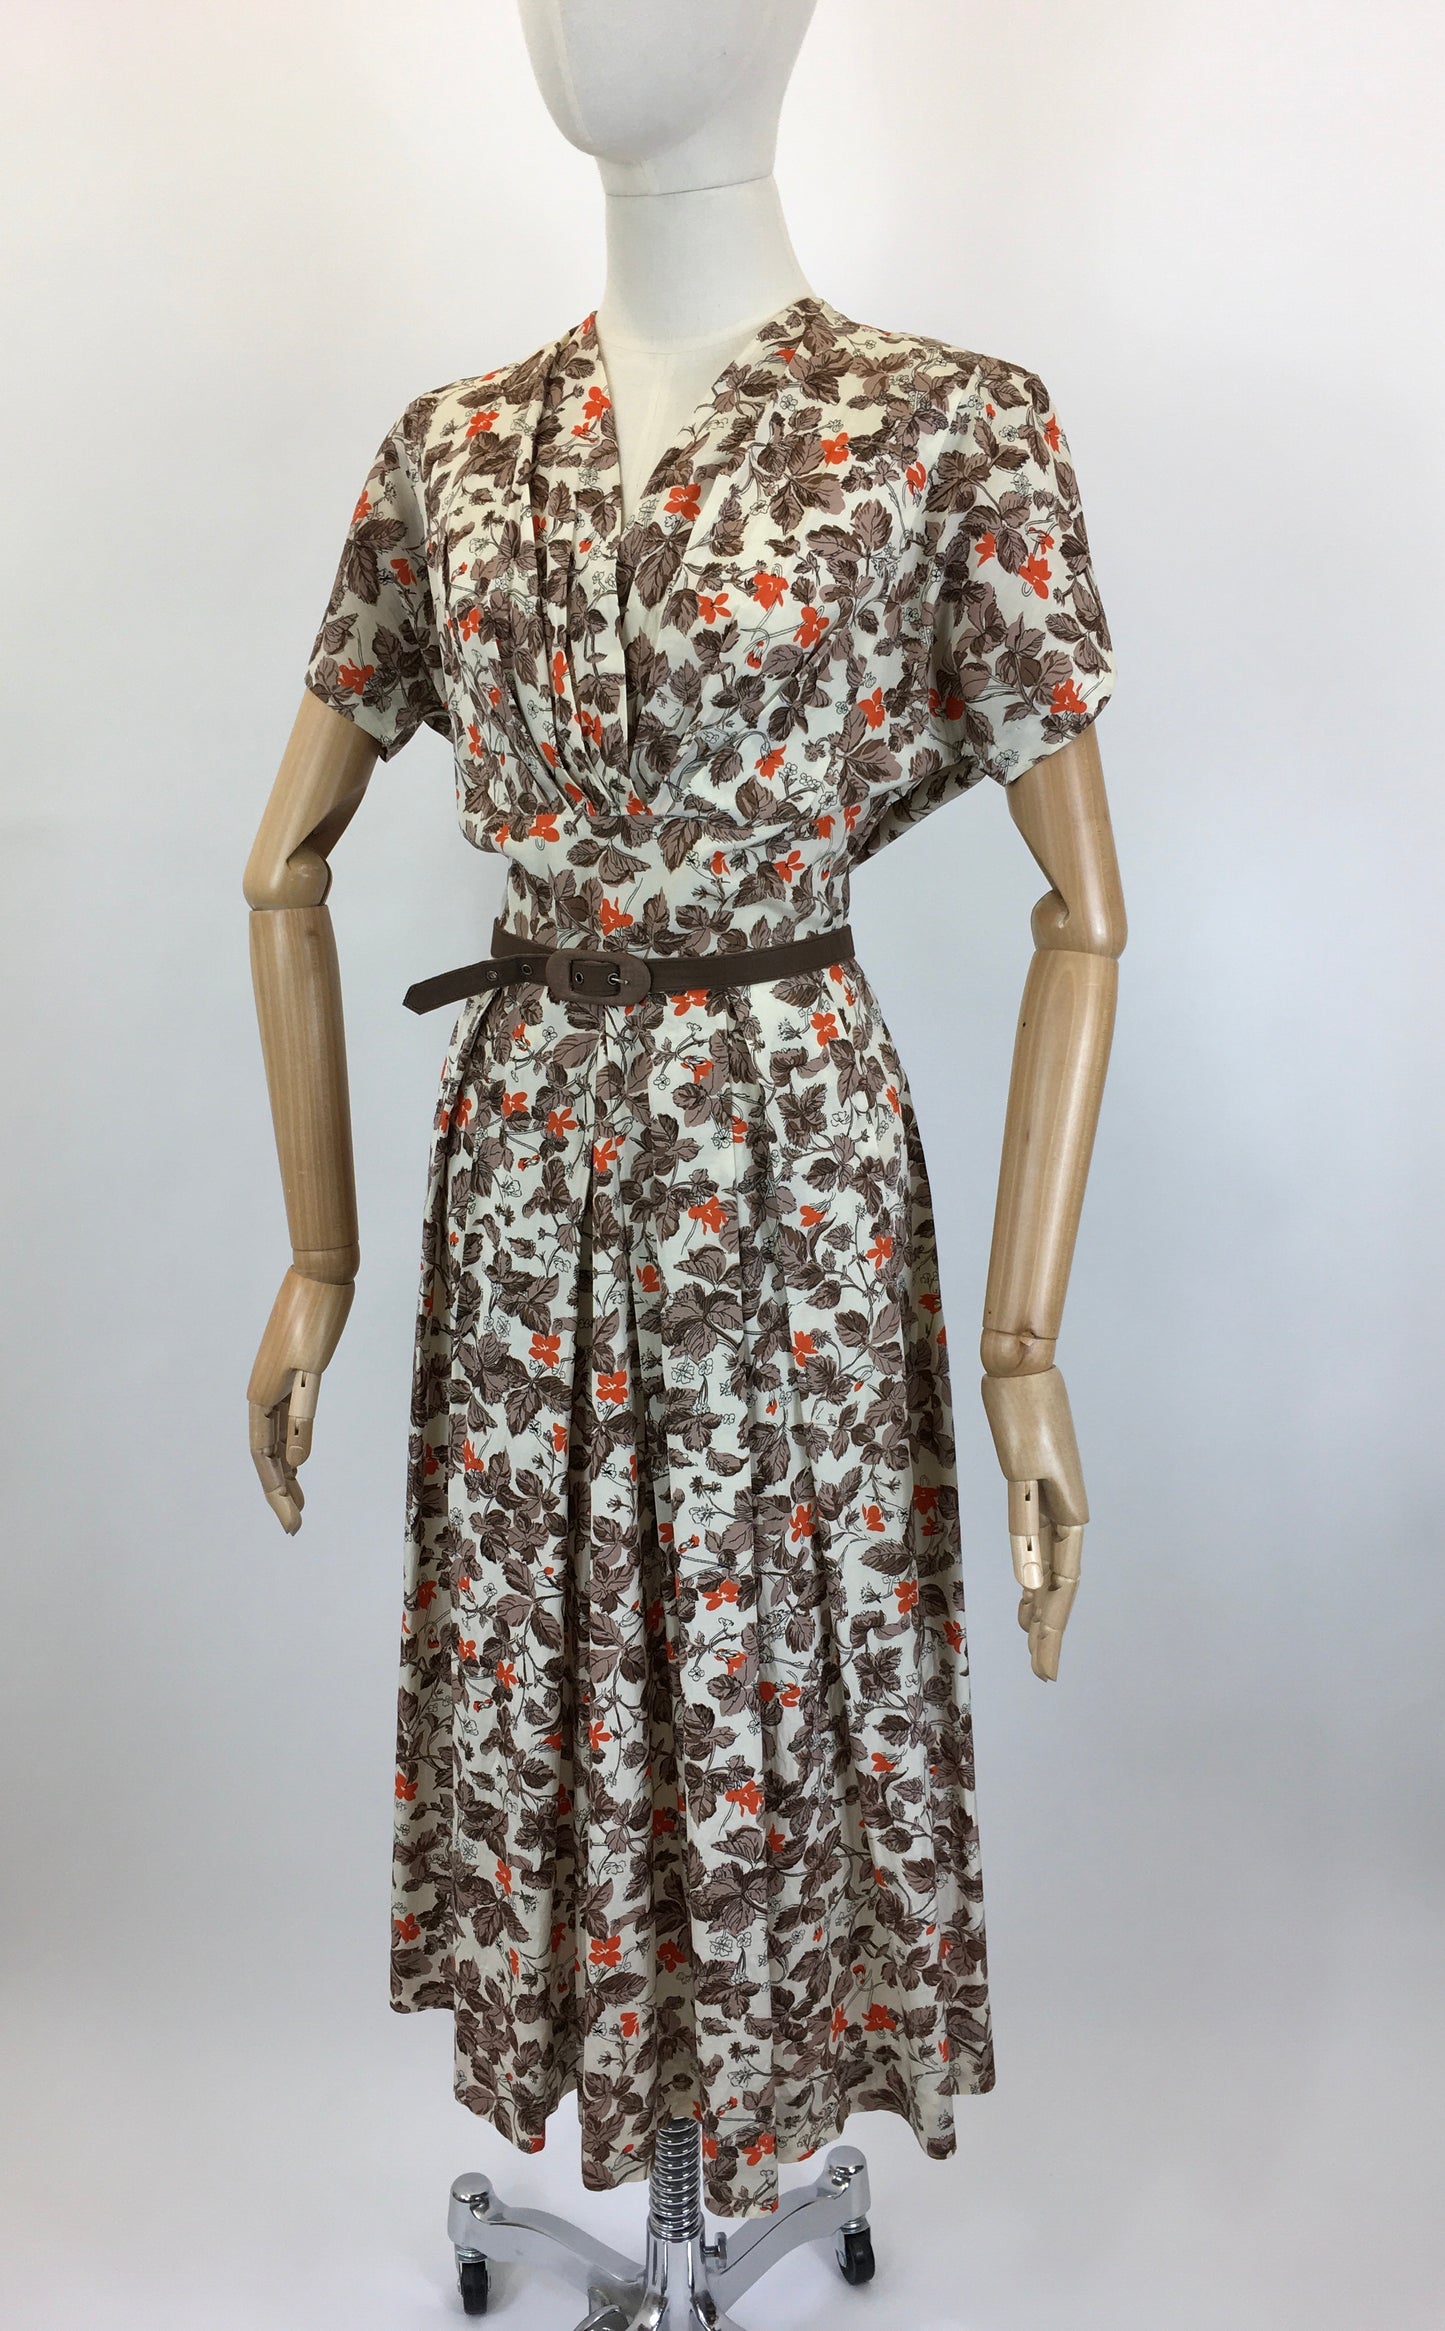 Original 1940's Beautiful Day Dress in Warm Browns, Rust & Cream - By ' Park Lane Frocks'